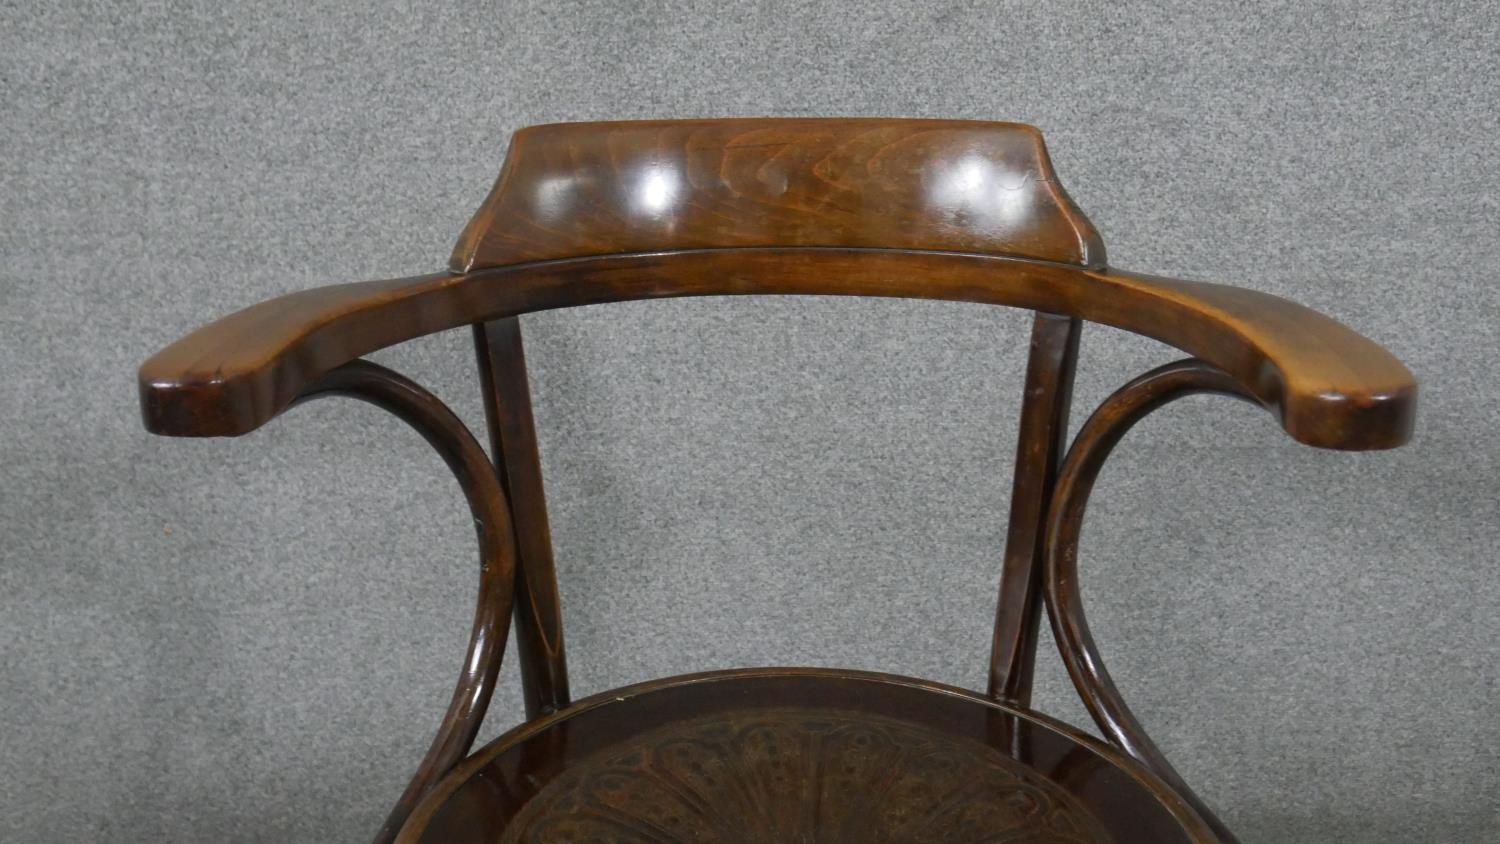 A late 19th/early 20th century Thonet style bentwood open armchair, with a circular pokerwork seat - Image 4 of 8